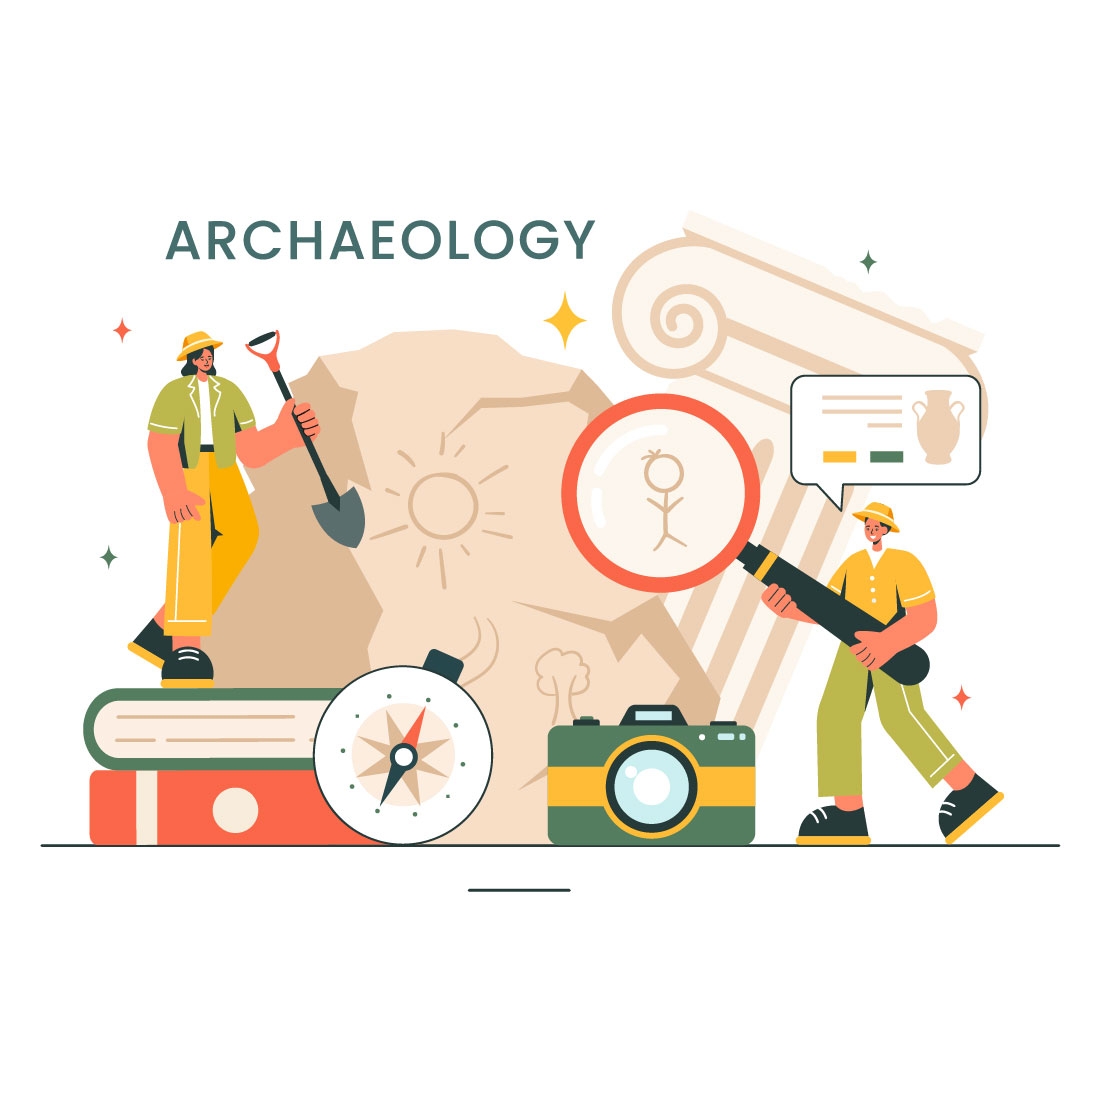 13 Archeology Vector Illustration cover image.